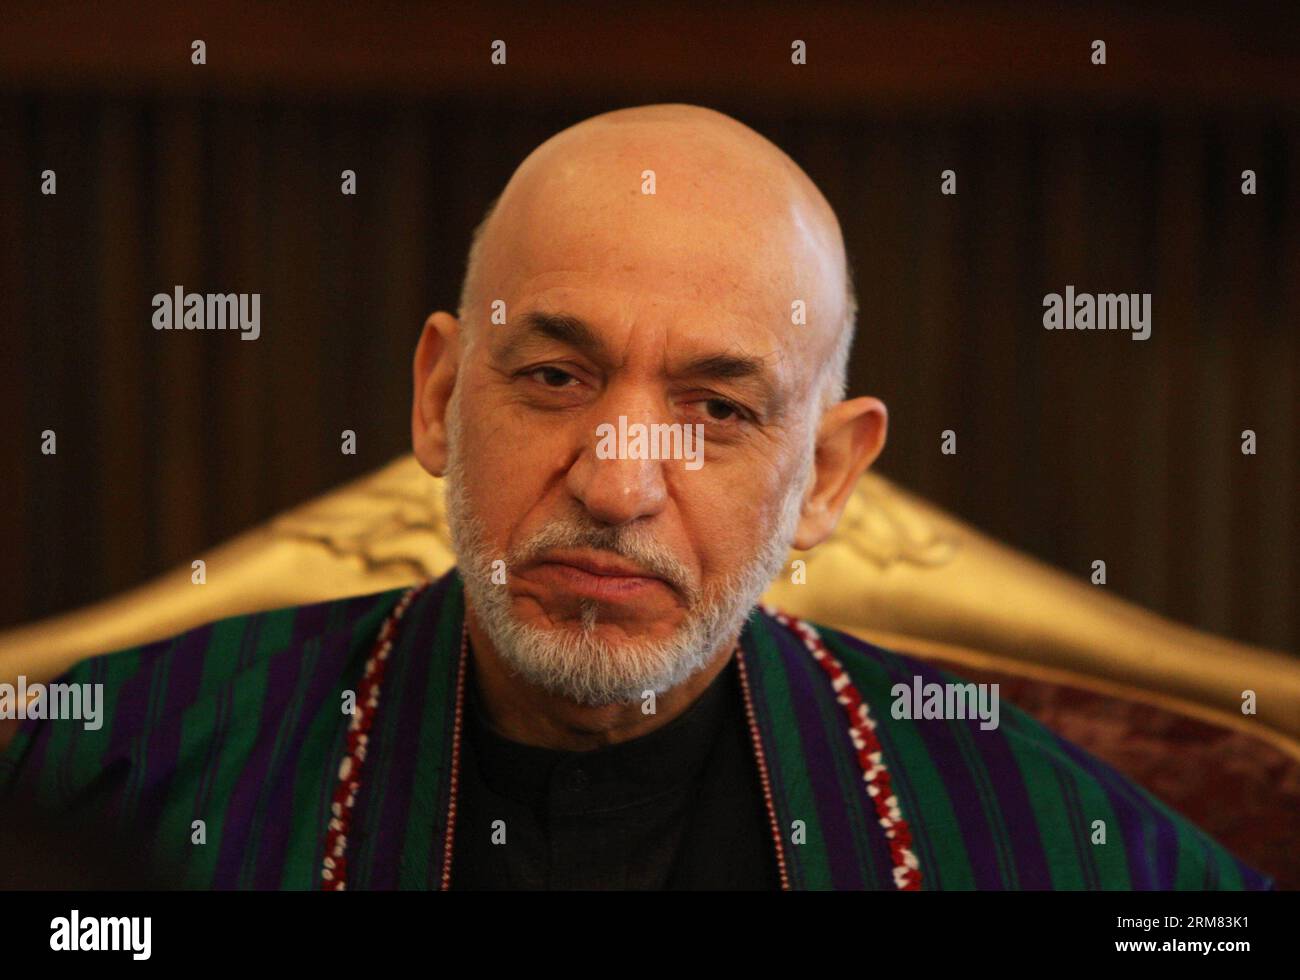 (140326) -- KABUL, March 26, 2014 (Xinhua) -- Afghan President Hamid Karzai listens during an interview with Xinhua News Agency at the presidential palace in Kabul, Afghanistan on March 26, 2014. Afghan President Hamid Karzai on Wednesday utterly rejected the rumors and reports suggesting he would sign the controversial Bilateral Security Agreement (BSA) with Washington before April 5 presidential elections to allow limited number of U.S. forces remain in Afghanistan after 2014 pullout of NATO-led troops from the militancy-plagued country. (Xinhua/Ahmad Massoud) (lmz) AFGHANISTAN-KABUL-PRESIDE Stock Photo